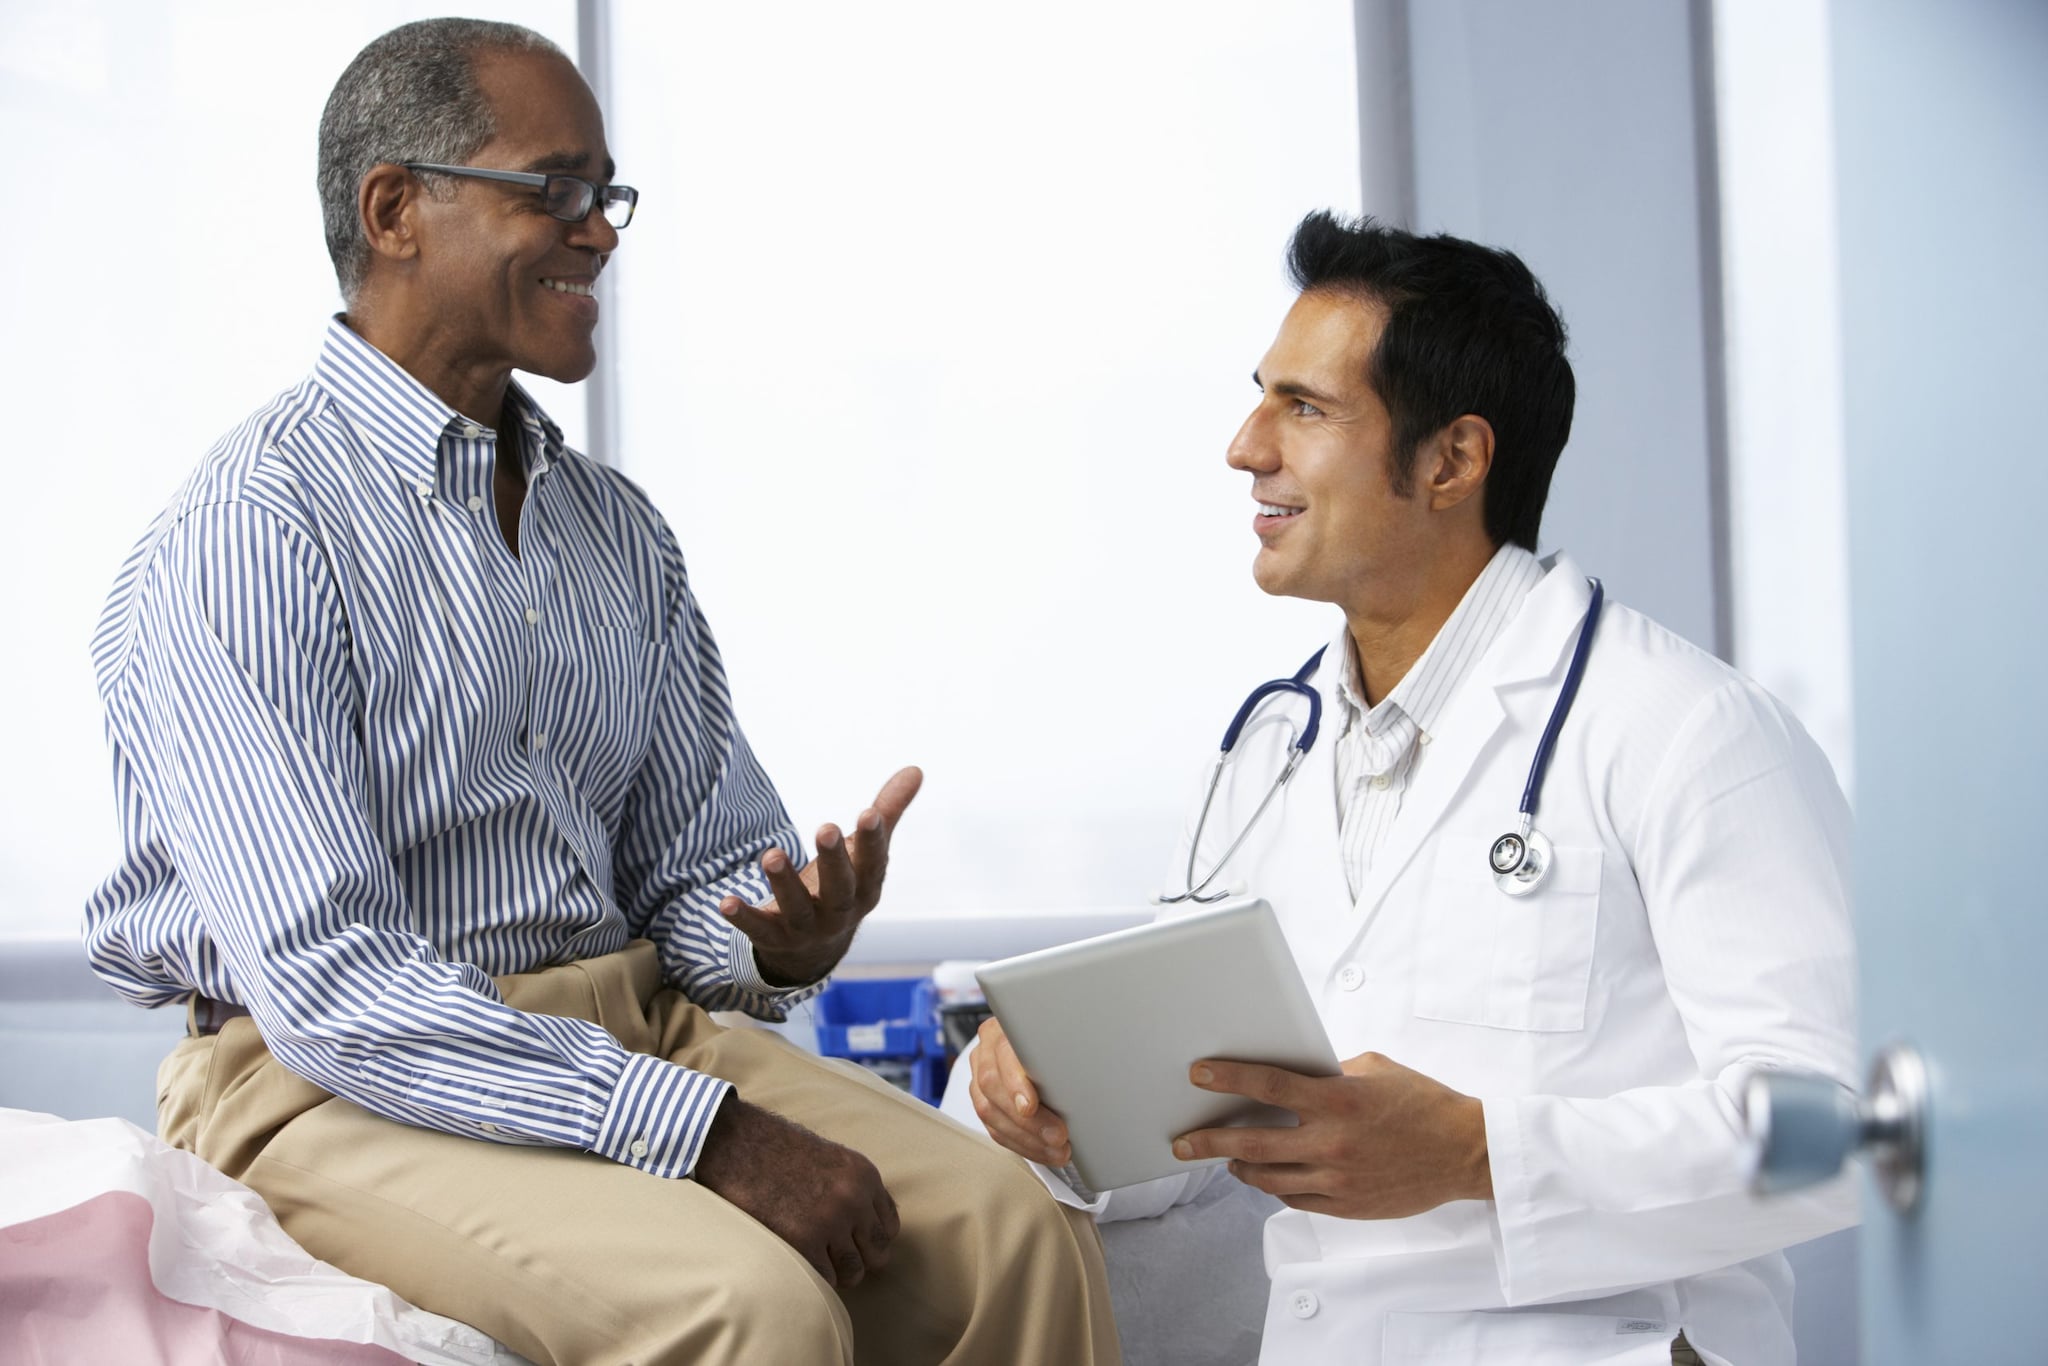 A clinician speaks with a smiling patient